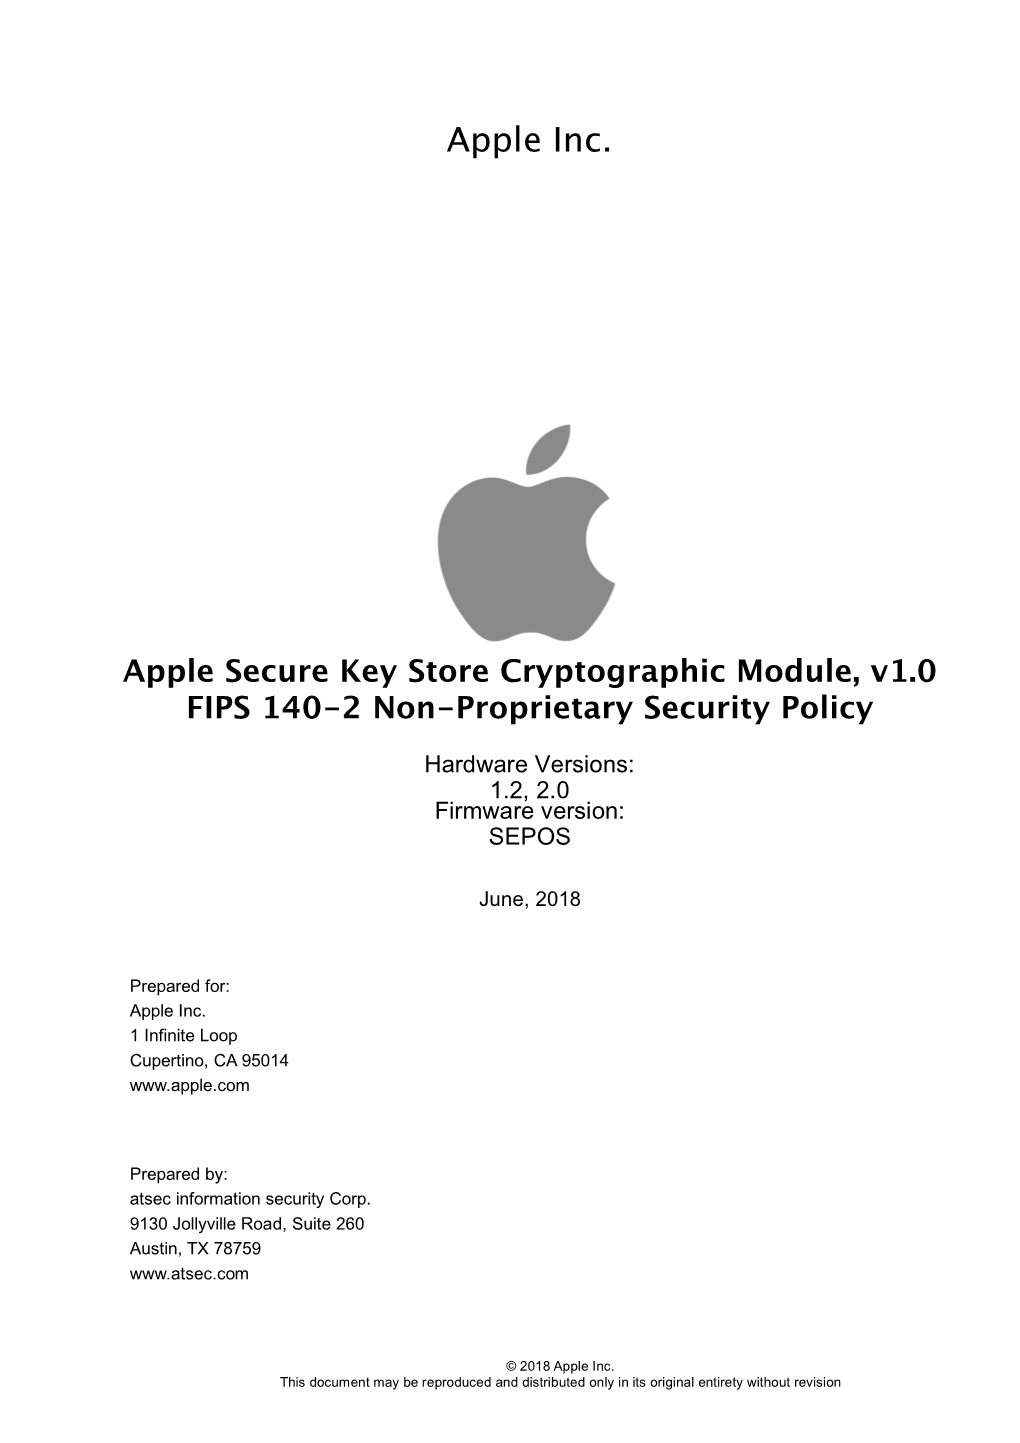 Apple Secure Key Store Cryptographic Module, V1.0 FIPS 140-2 Non-Proprietary Security Policy